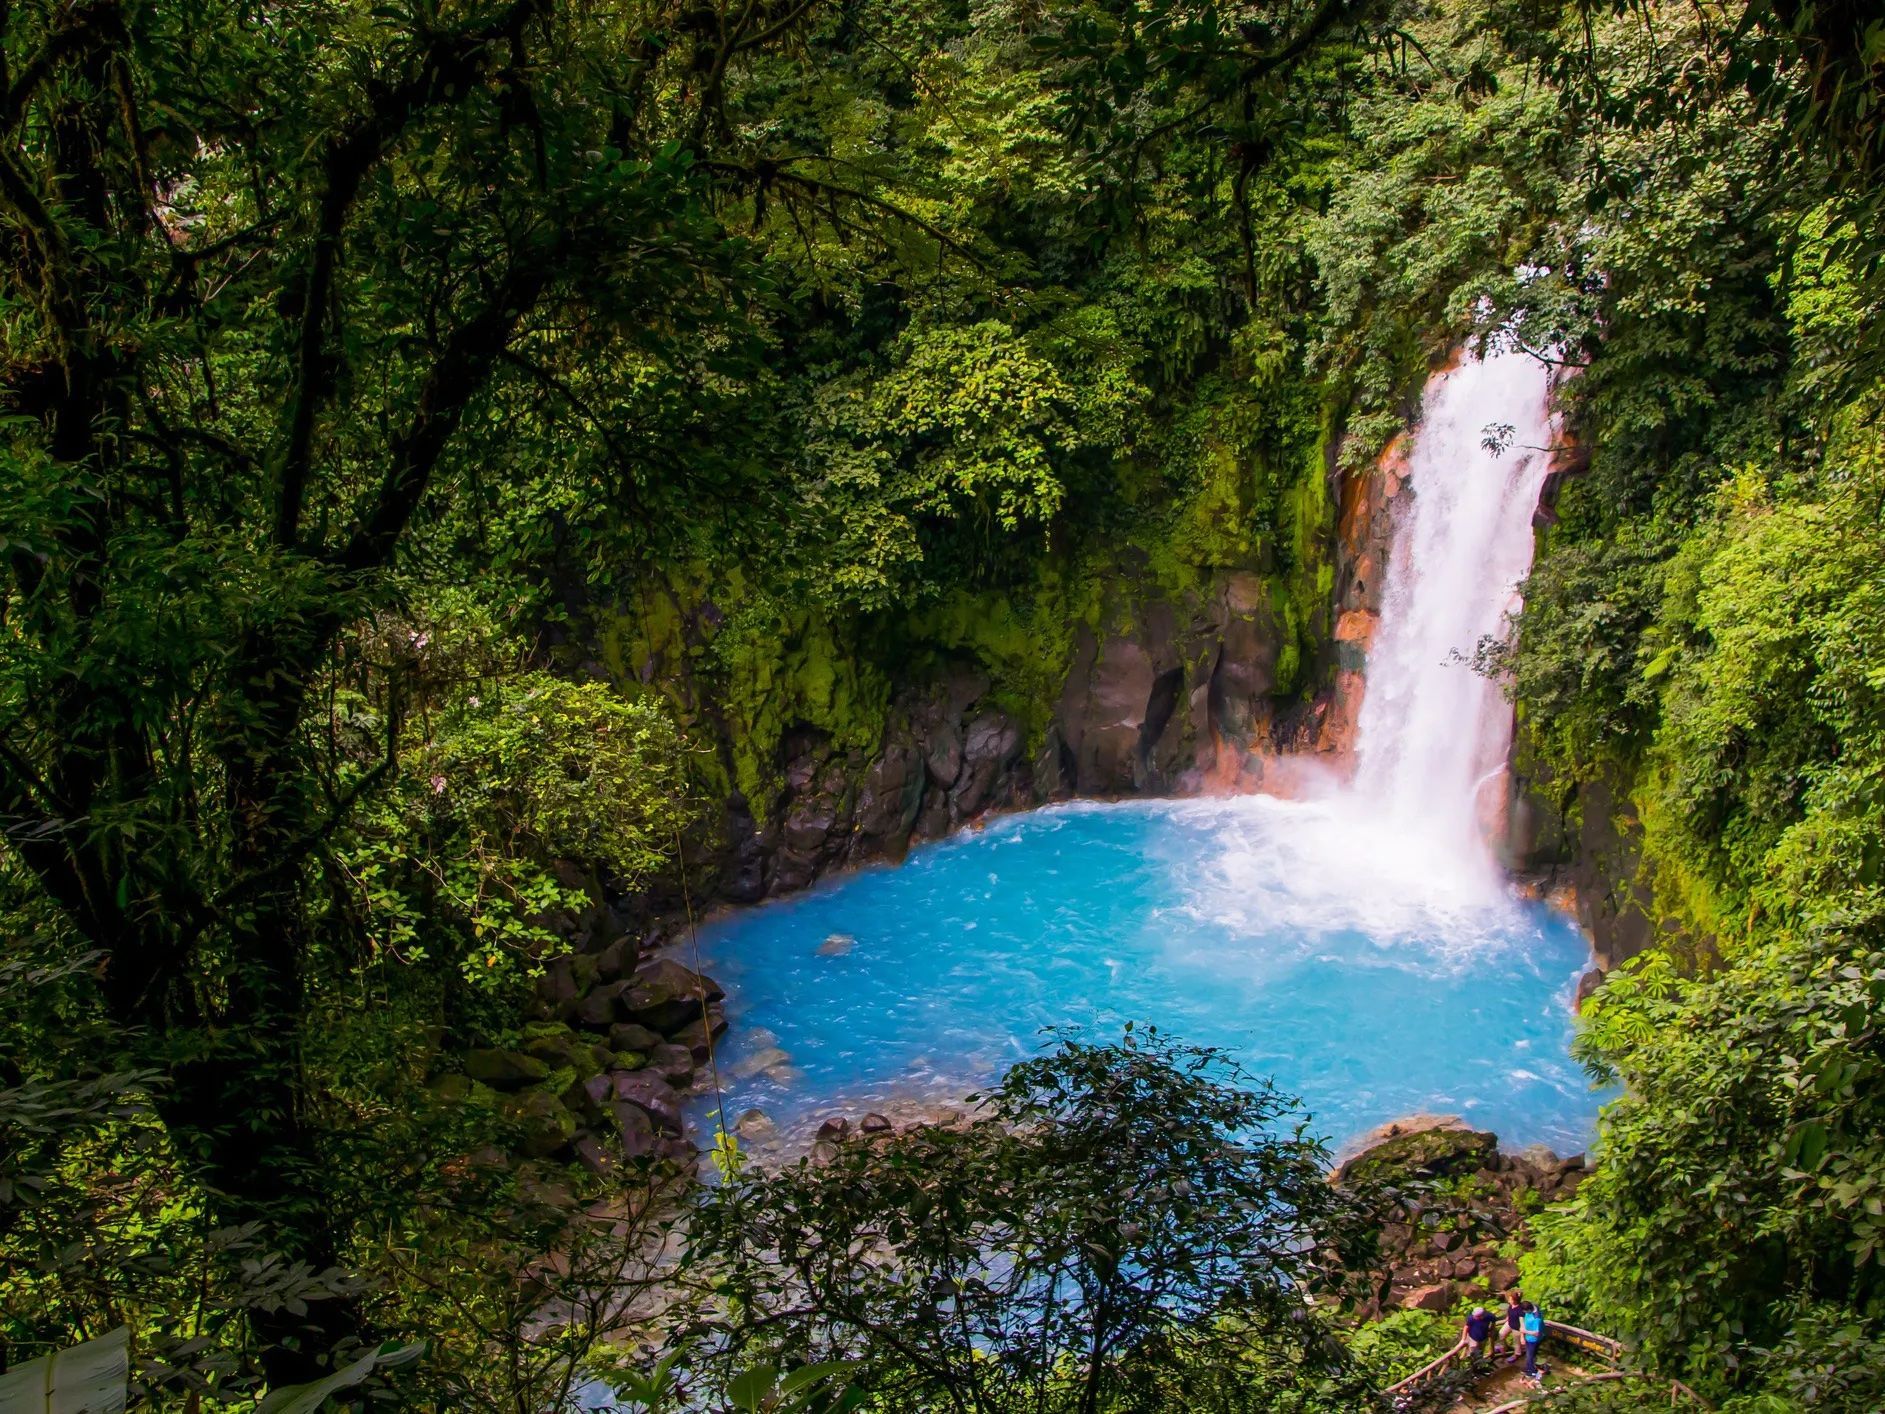 One of the startling blue pools in Tenorio National Park, Costa Rica, with a high waterfall.